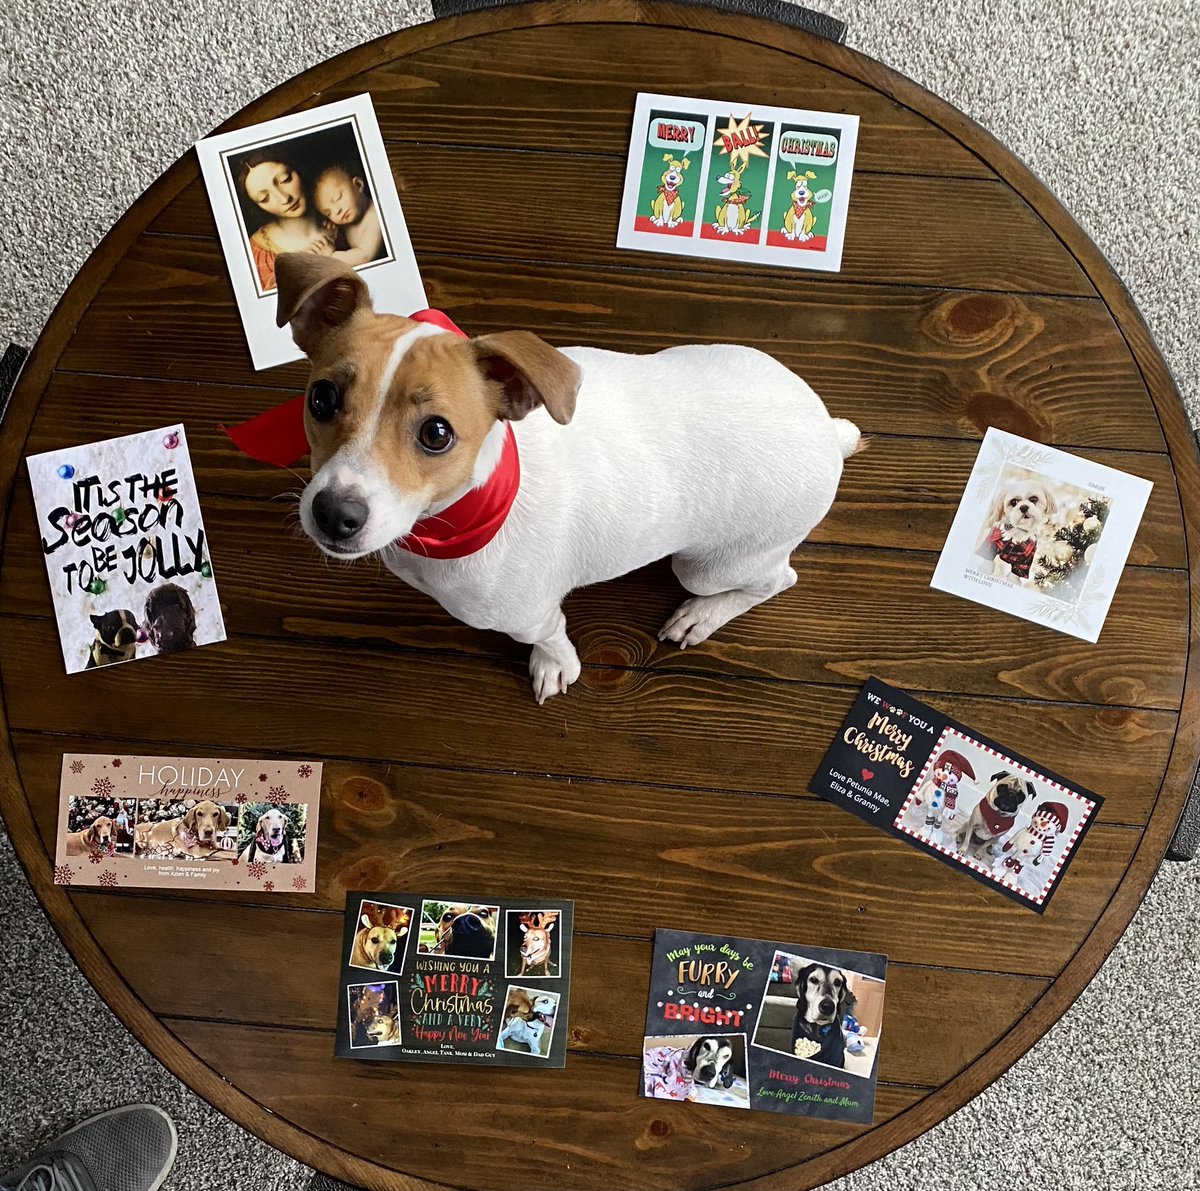 #PostAFavPic4VioletJan24 #dogs #dogsoftwitter #zshq #Mondayvibes #Monday 🧩
Day 29: “Puzzles” -  My 💌anipal Xmas cards look like pieces of a PUZZLE!! 🧩 💌🧩#BabyBea #JackRussell 💌